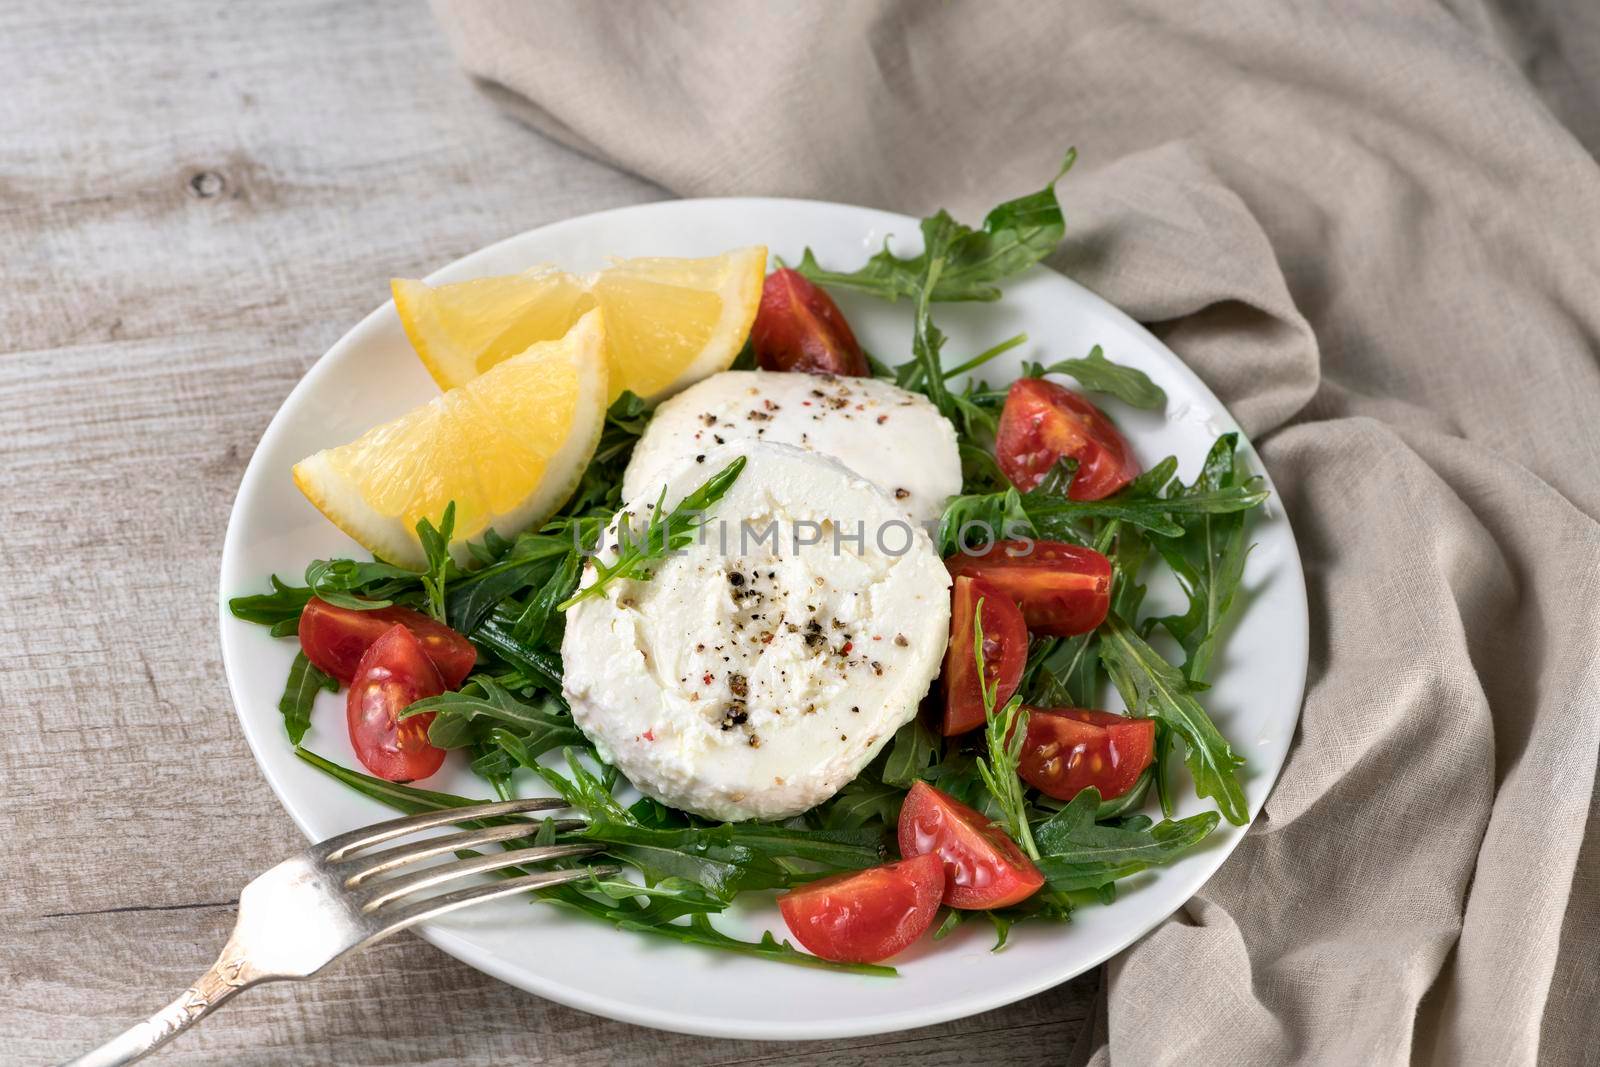 Mozzarella salad with arugula, cherry tomatoes, lemon, seasoned with spices and olive oil